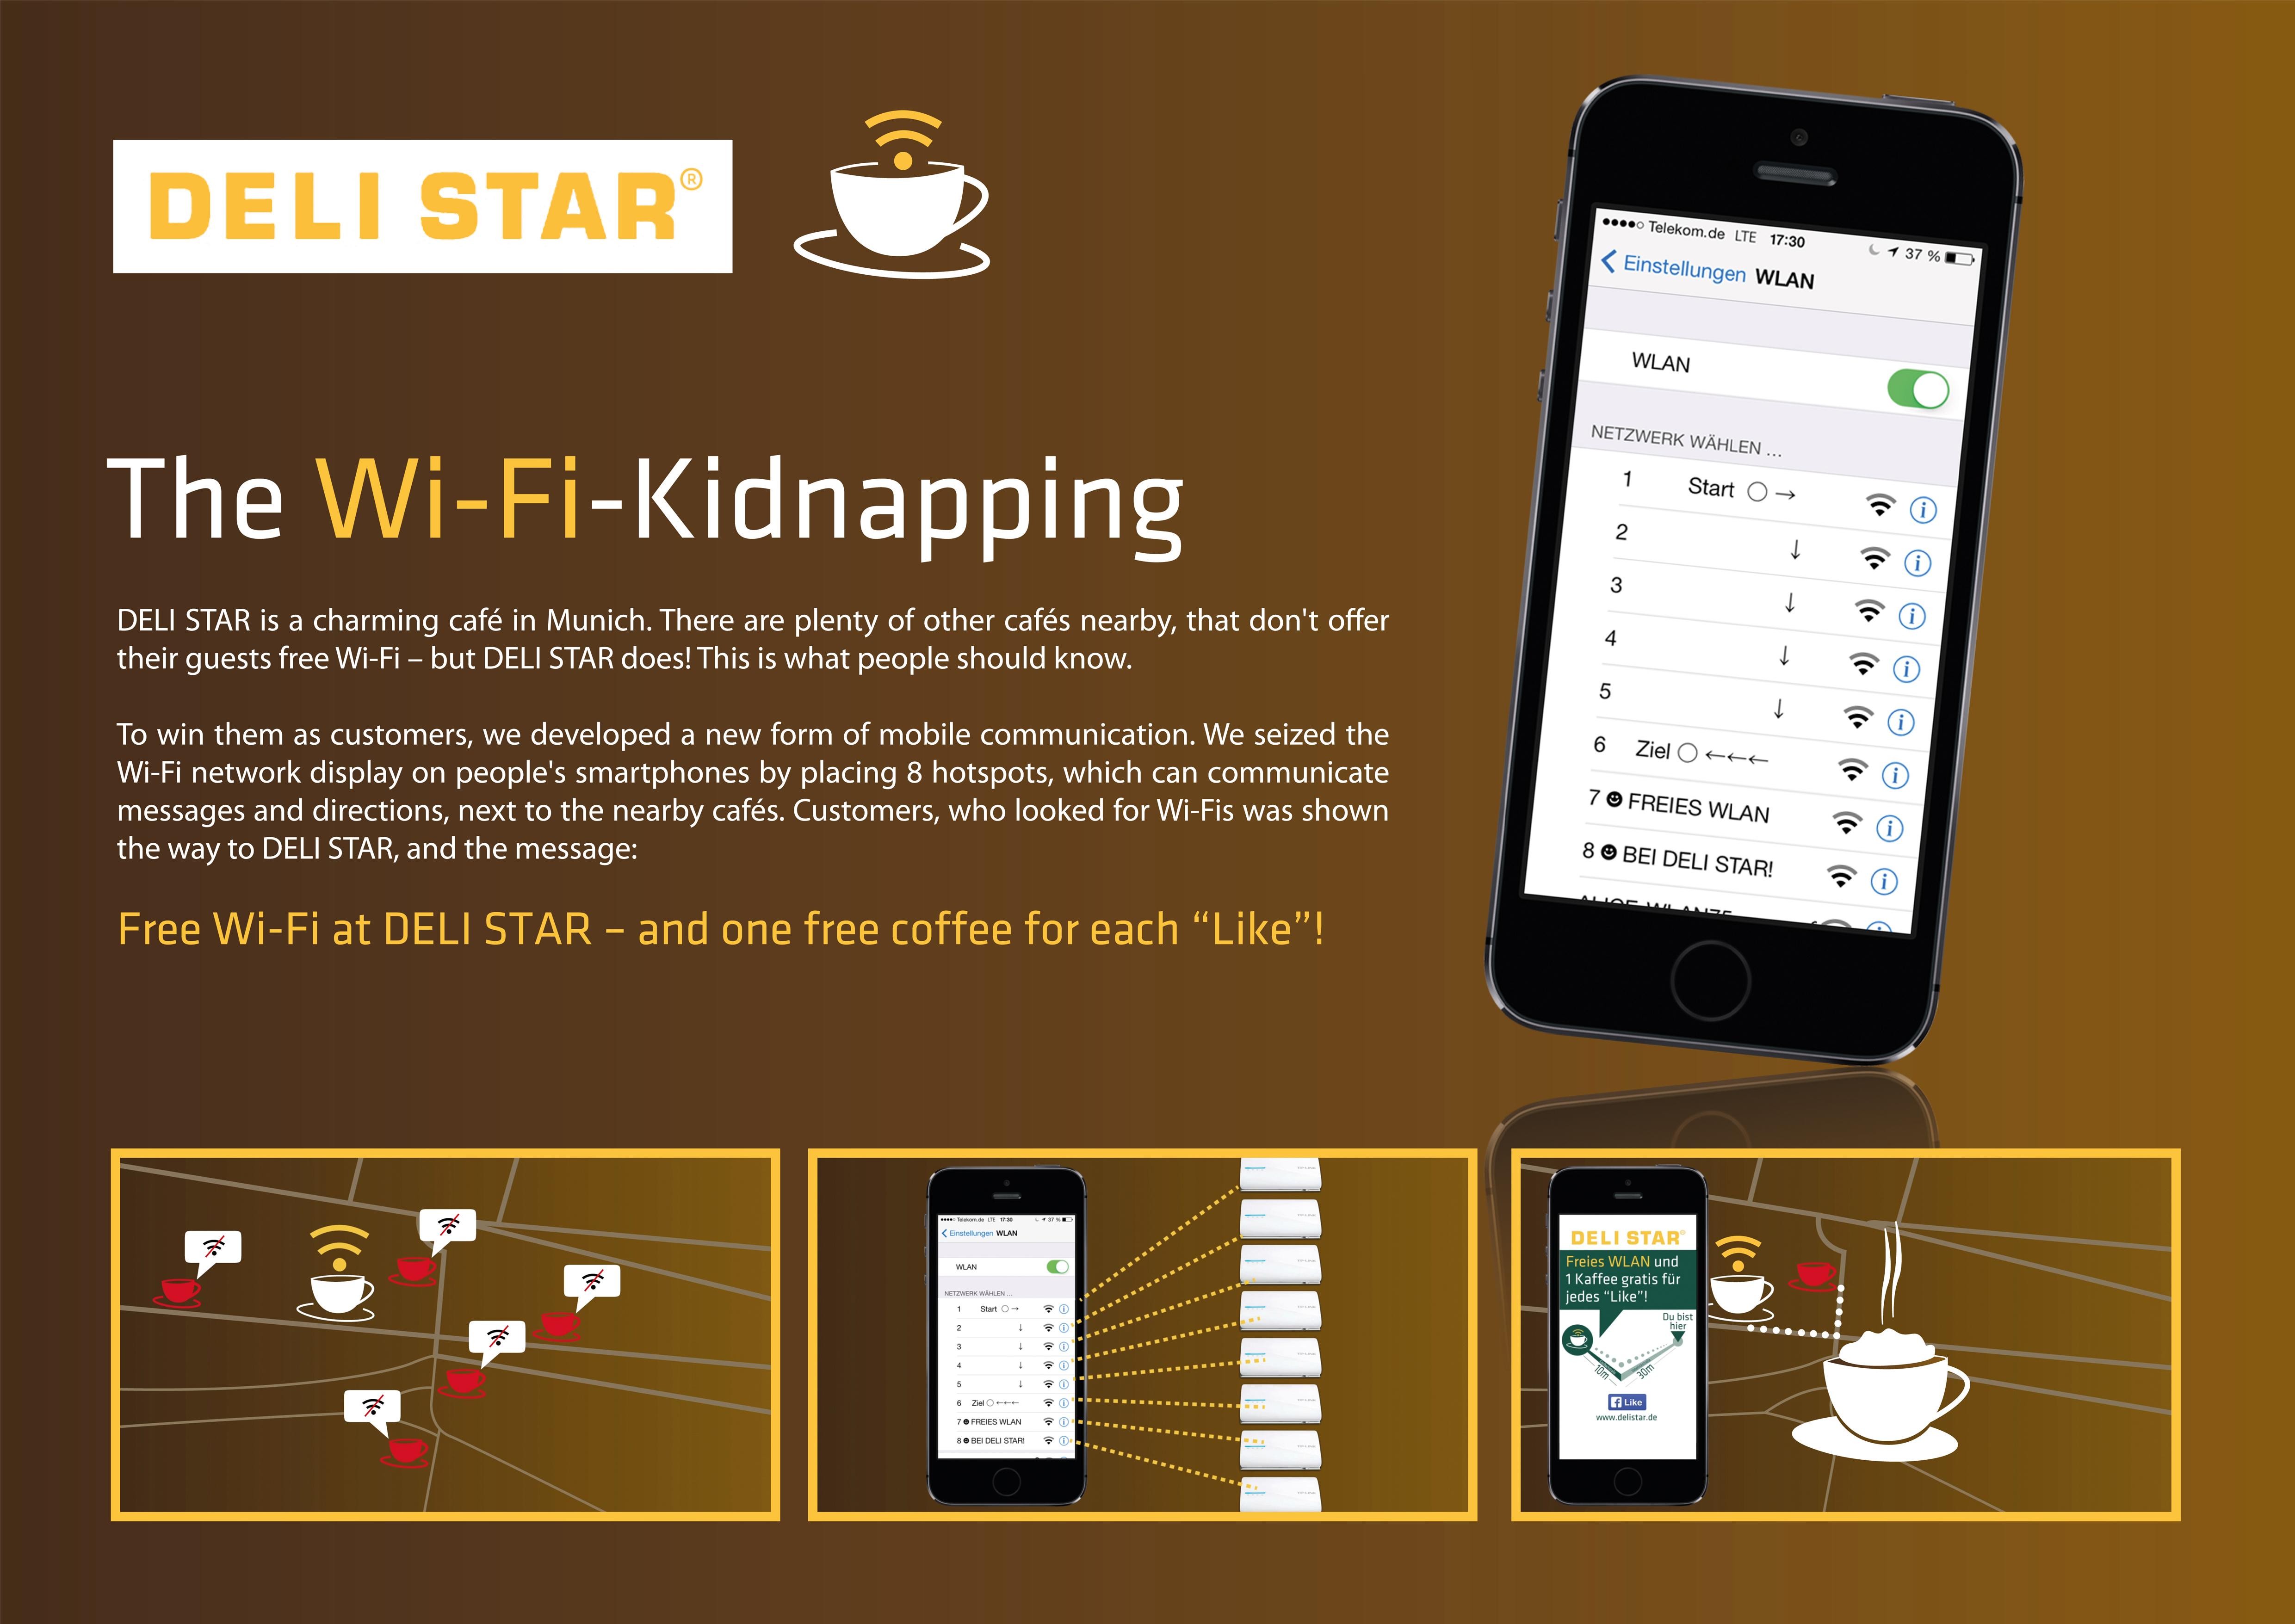 THE WI-FI - KIDNAPPING